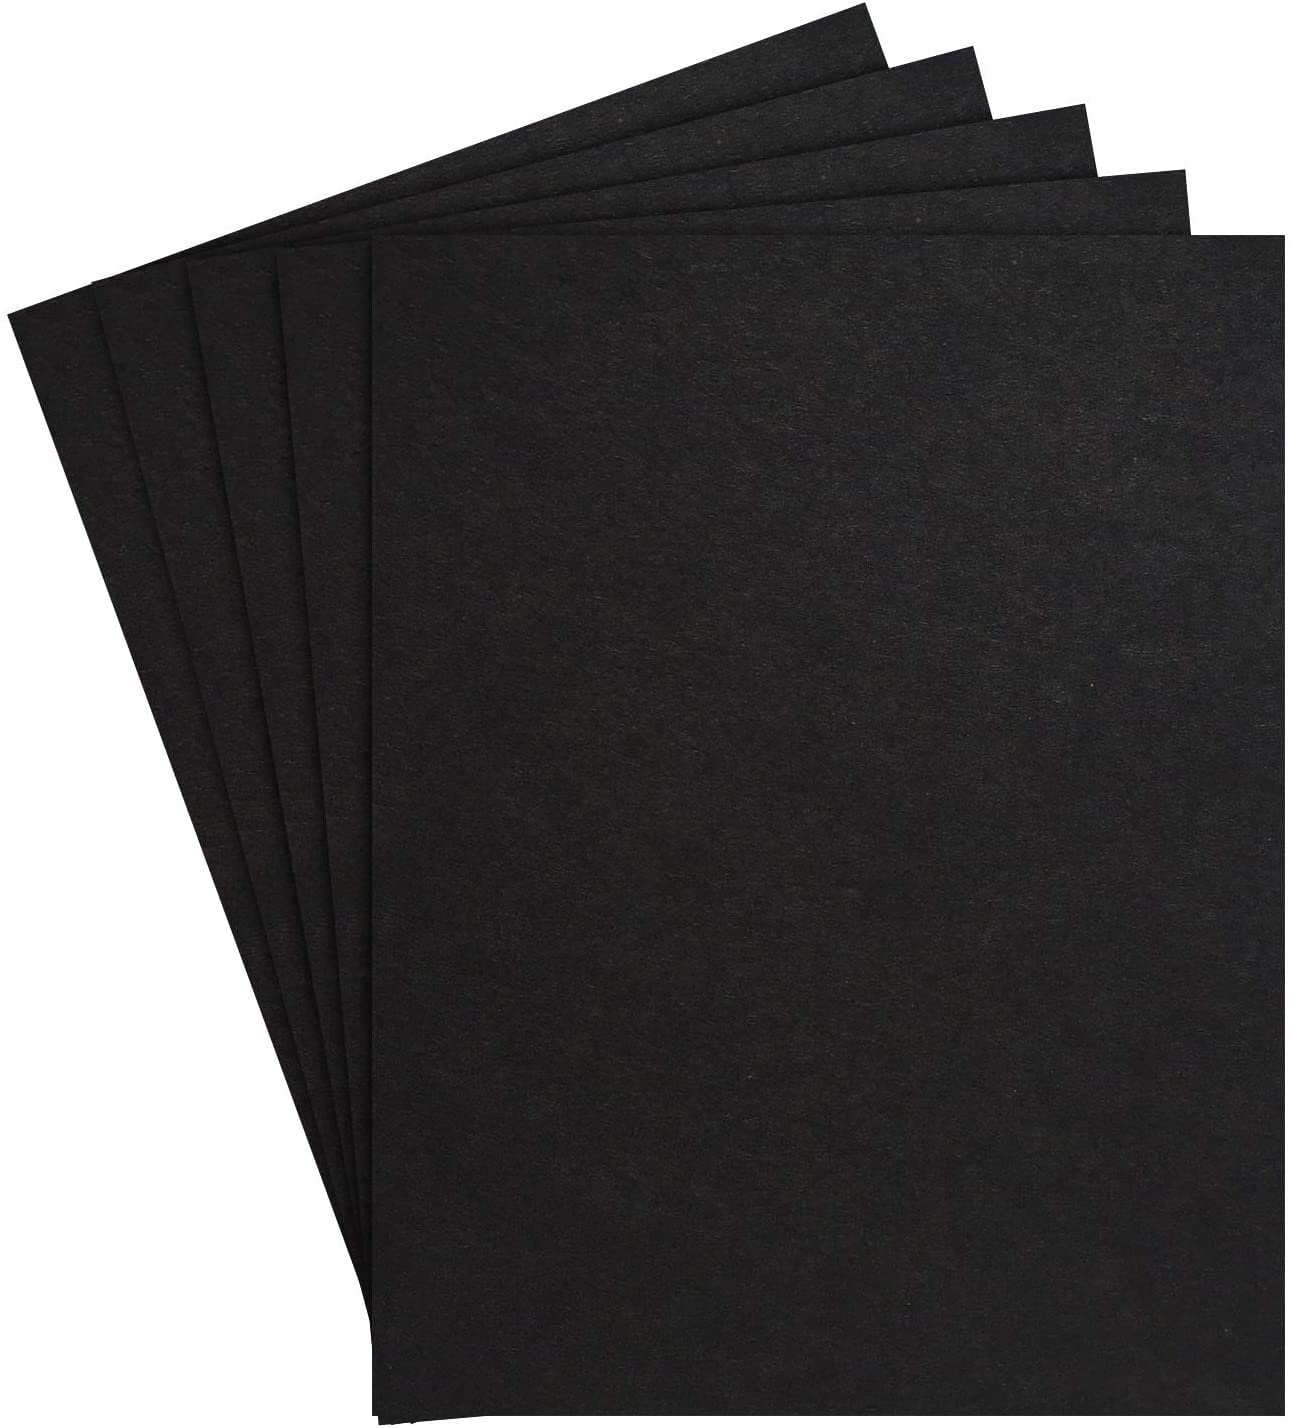 Art Crafts 2 packs of 20 Black Card  A4 Size x 40 Sheets 